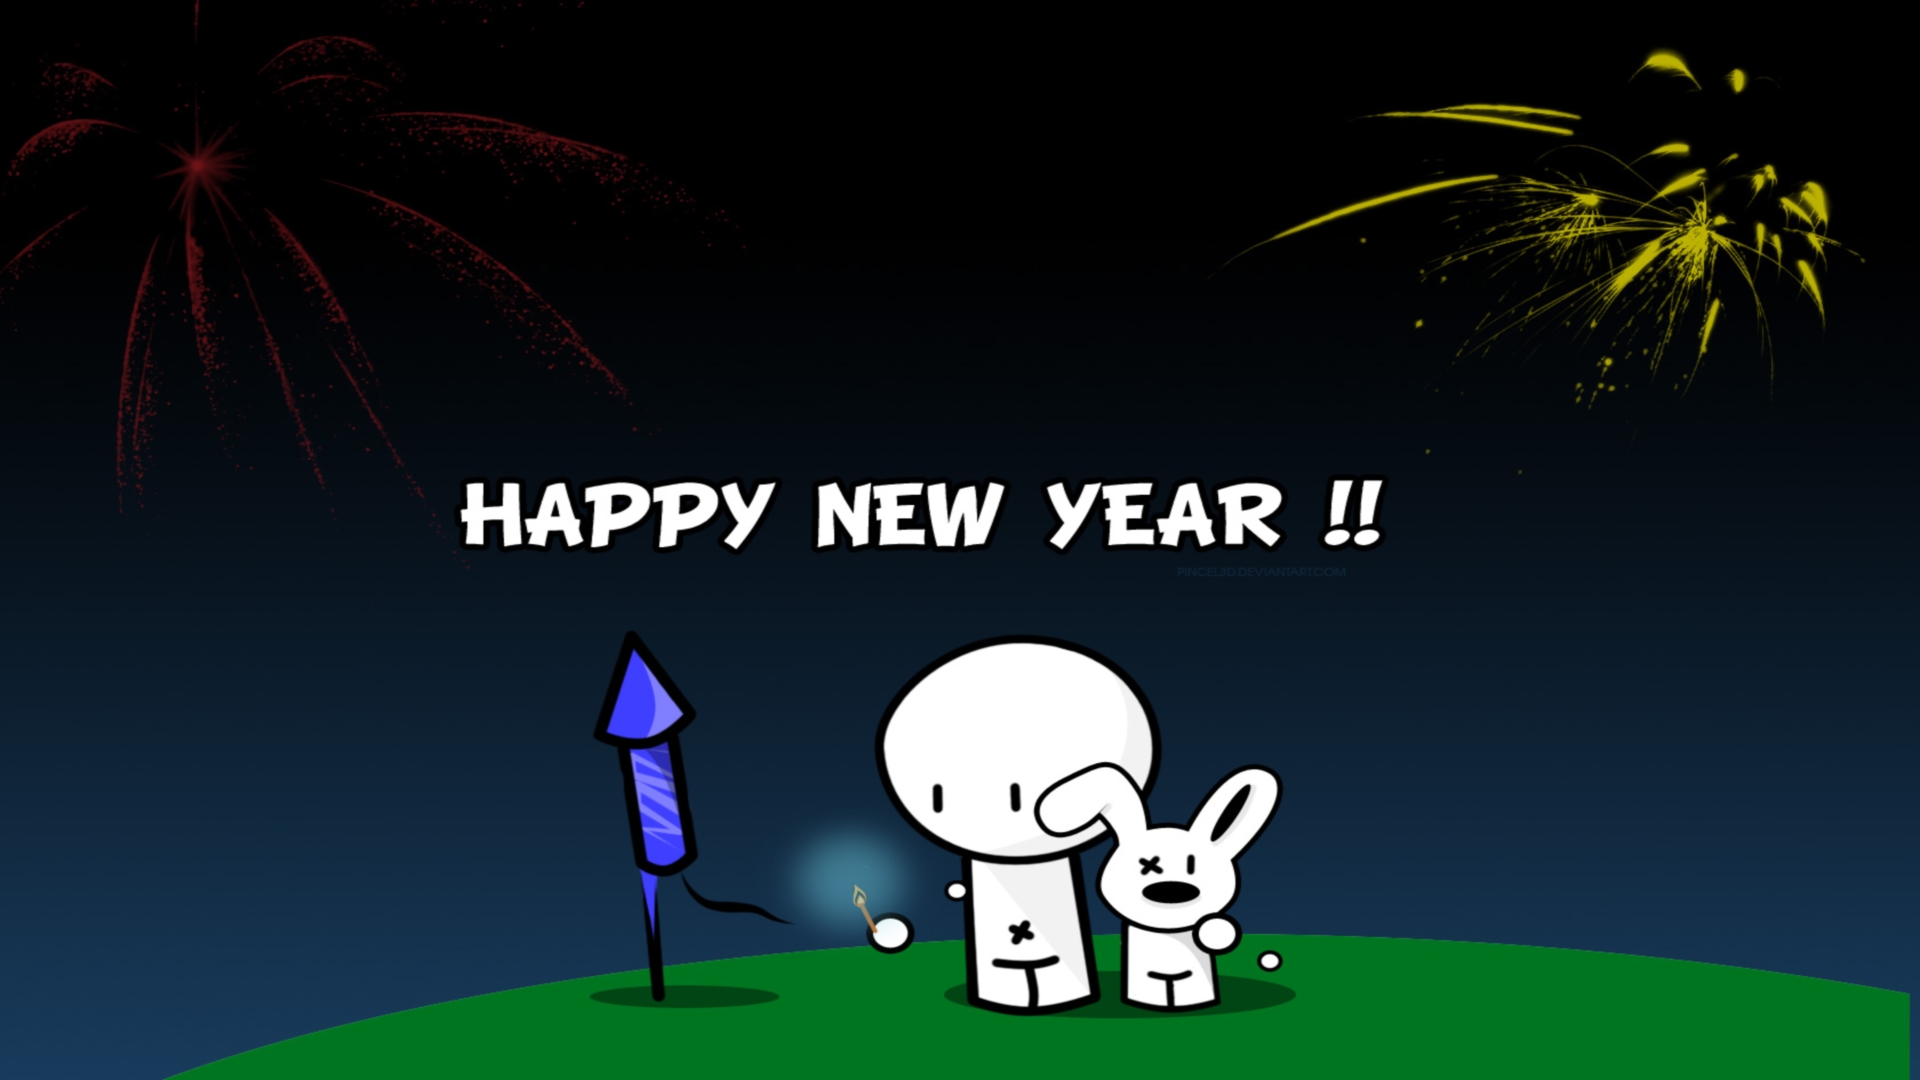 Happy-New-Year-Wallpaper-and-Images-1.jpg